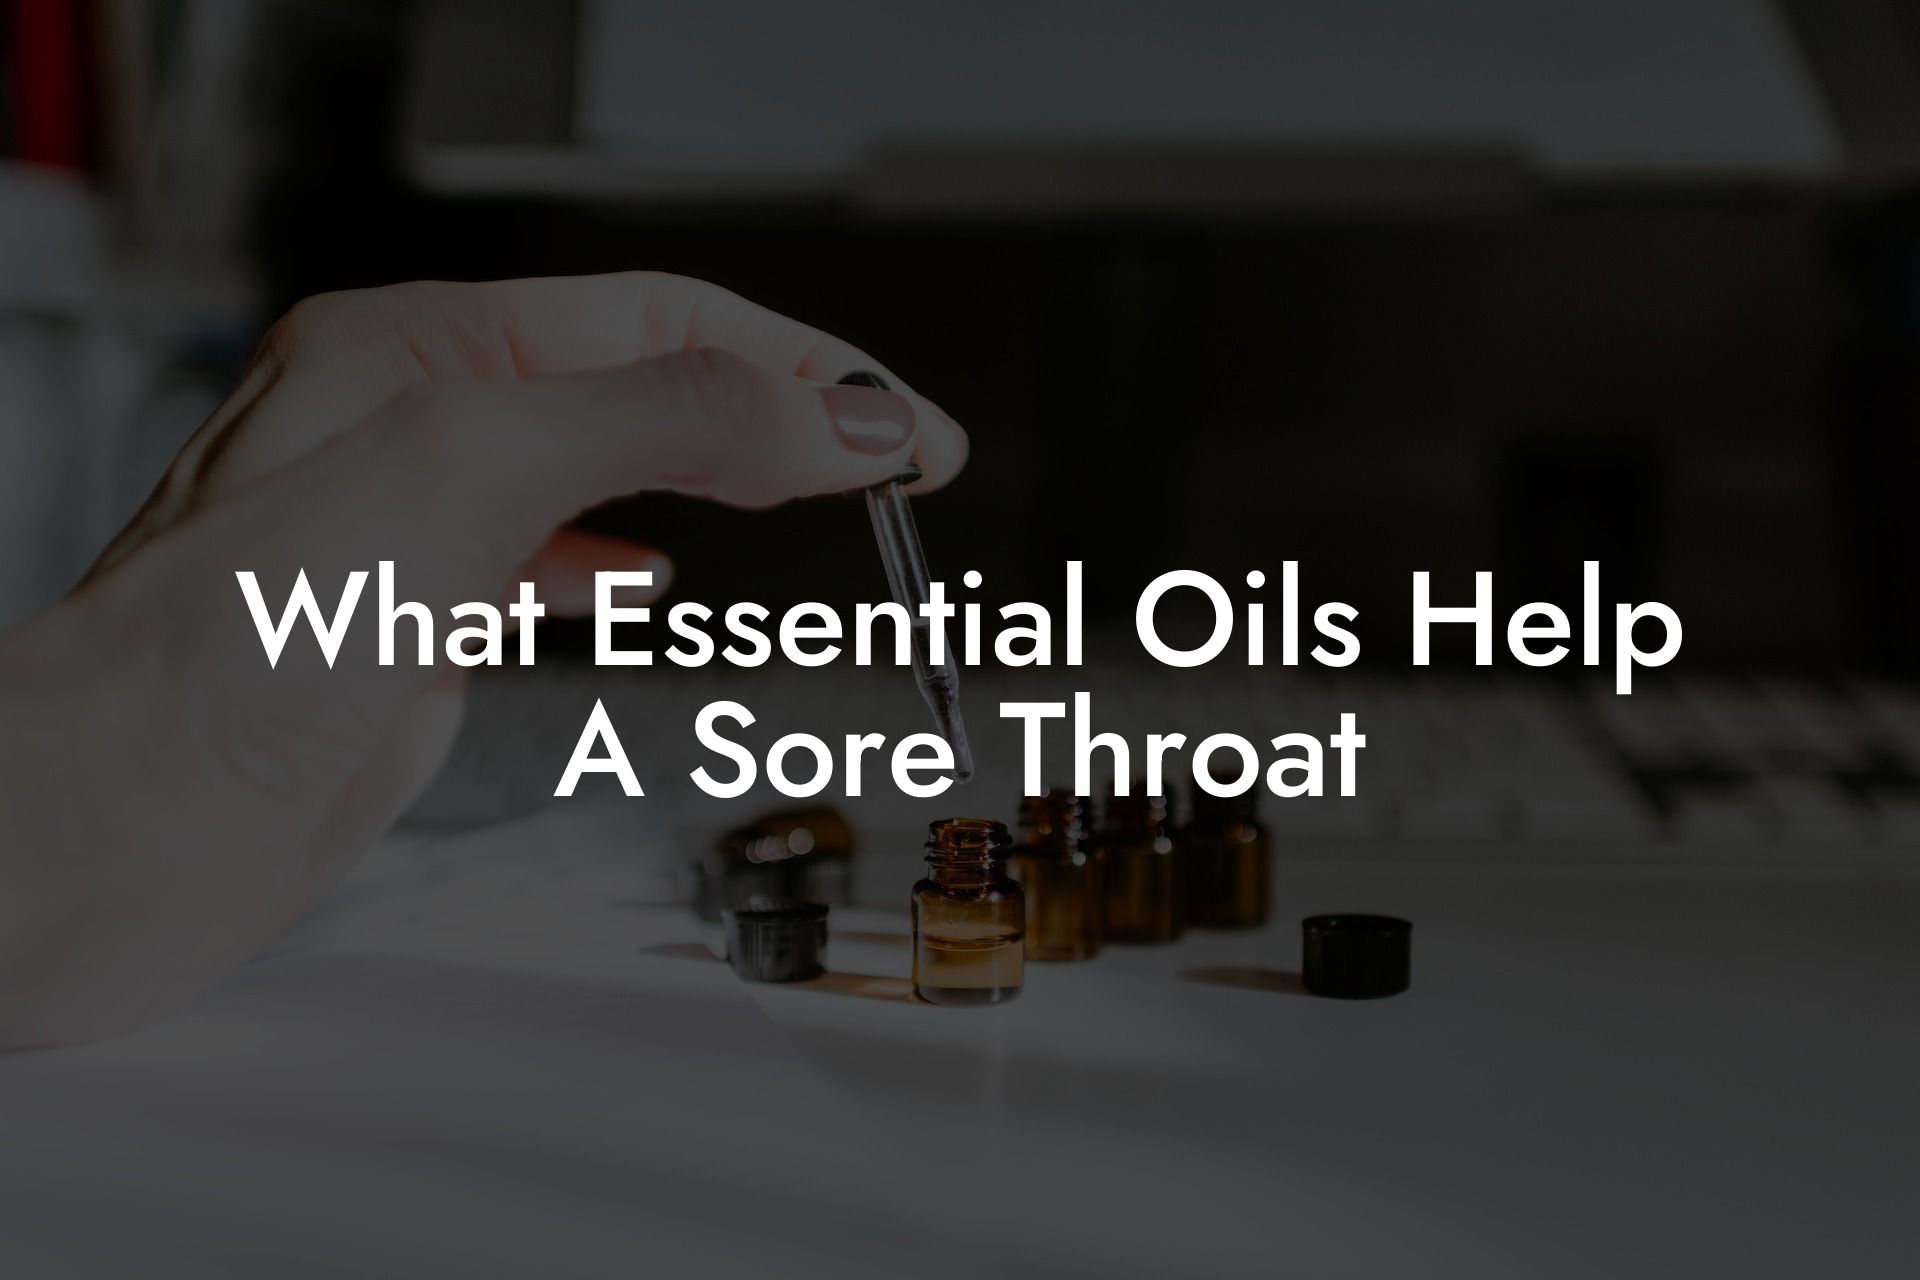 What Essential Oils Help A Sore Throat